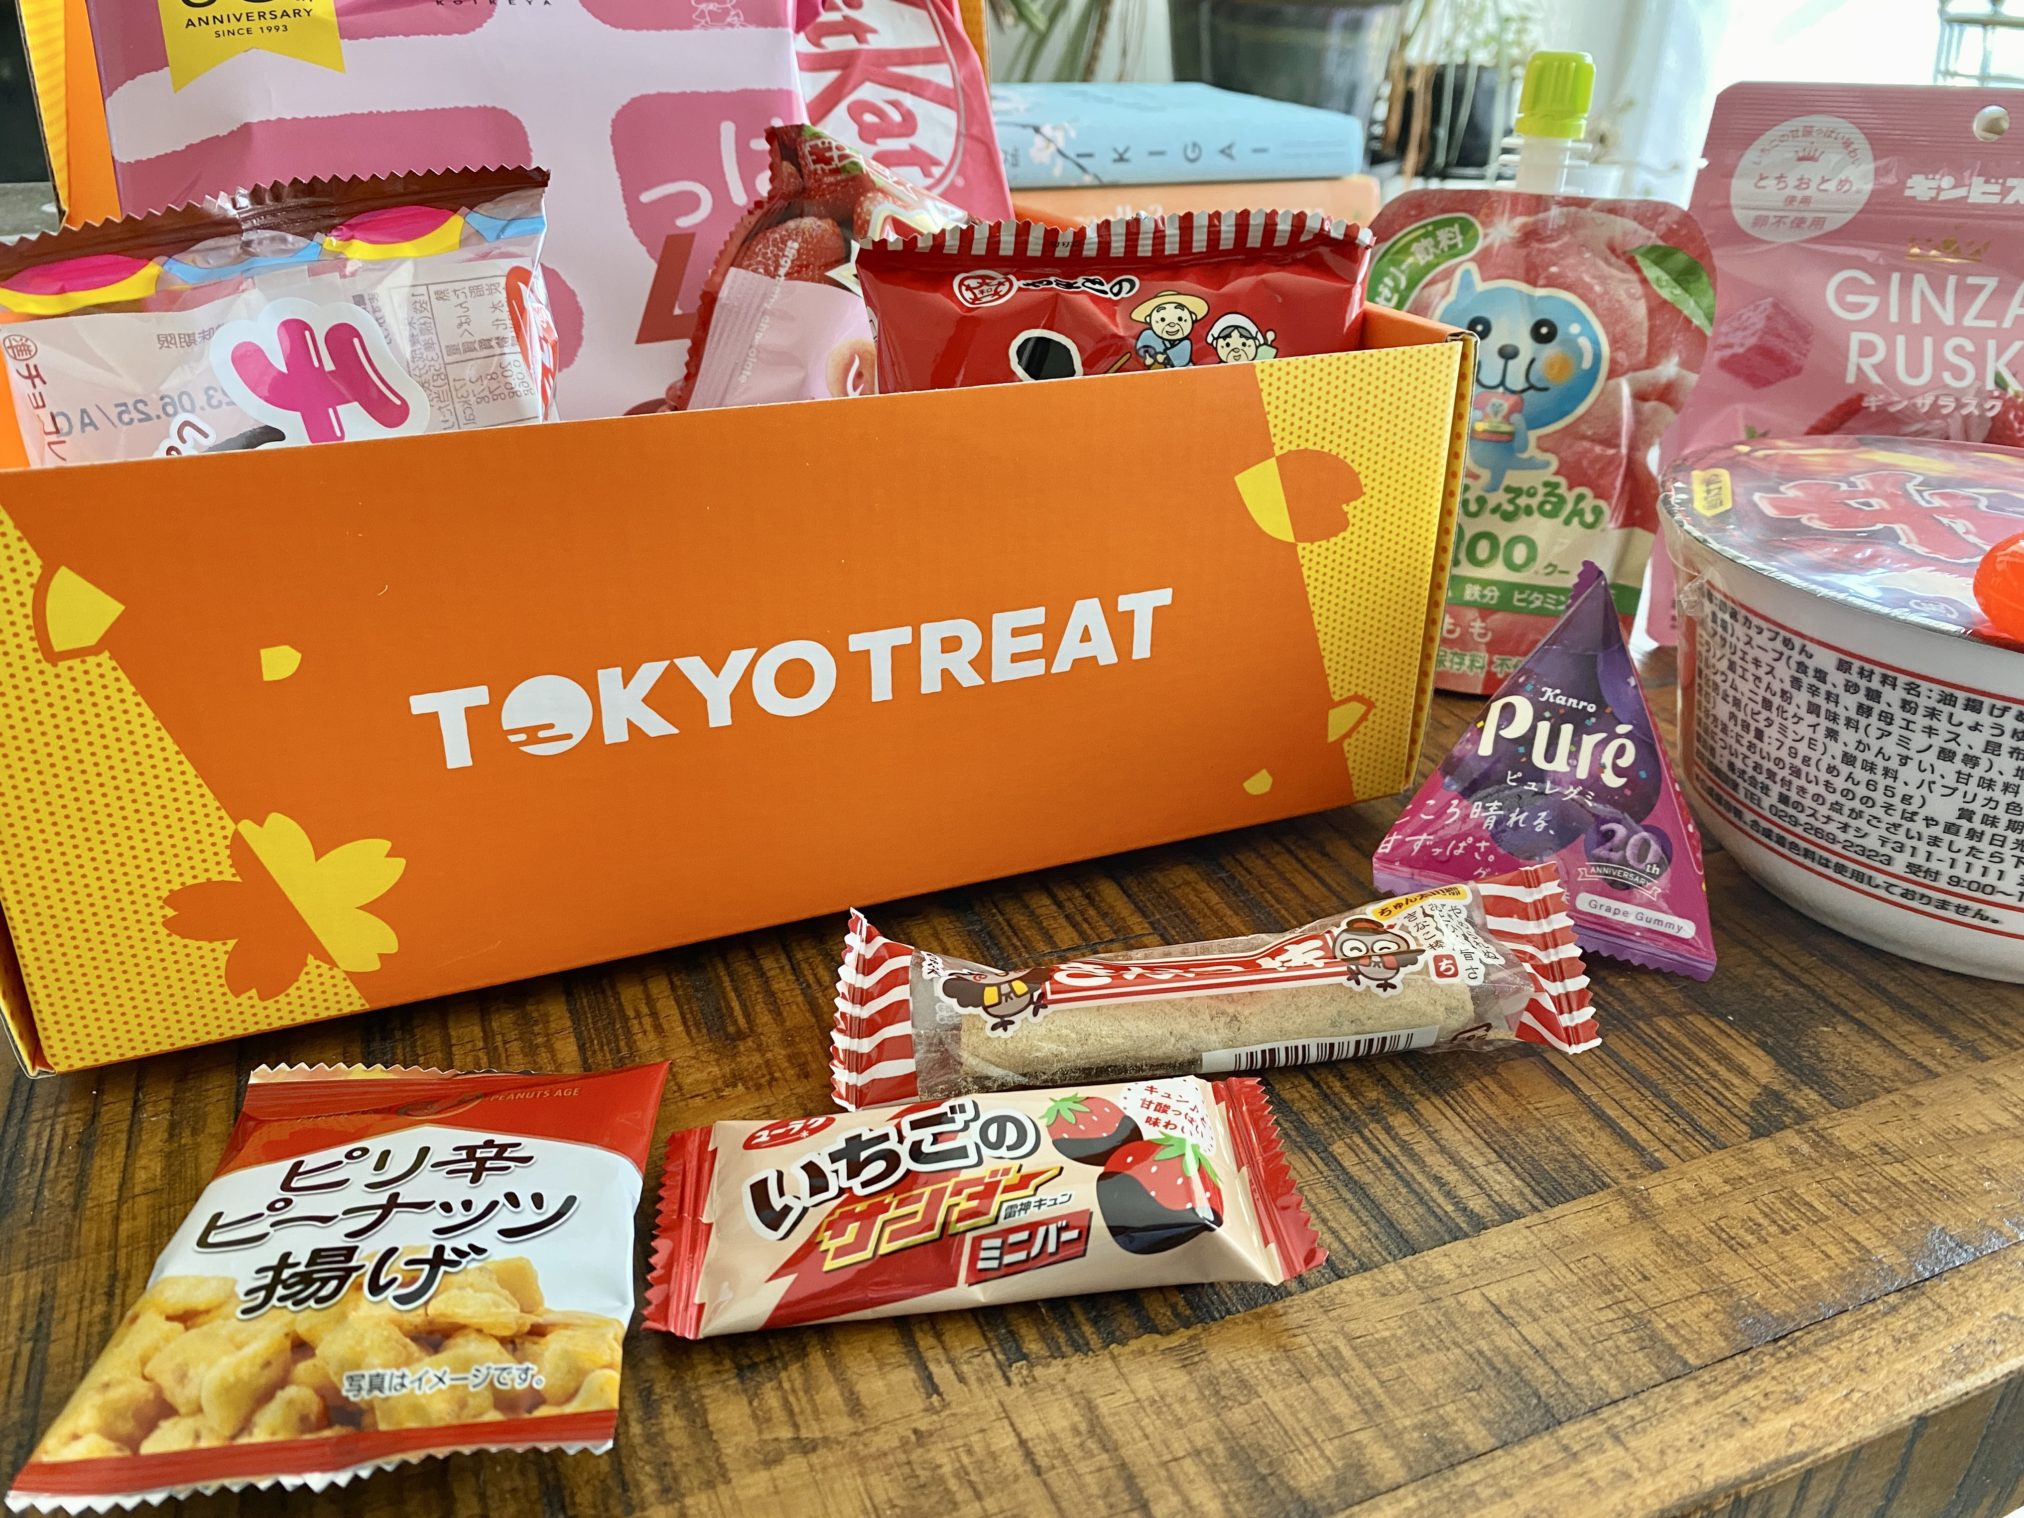 TokyoTreat Box Review - Is It Worth It?